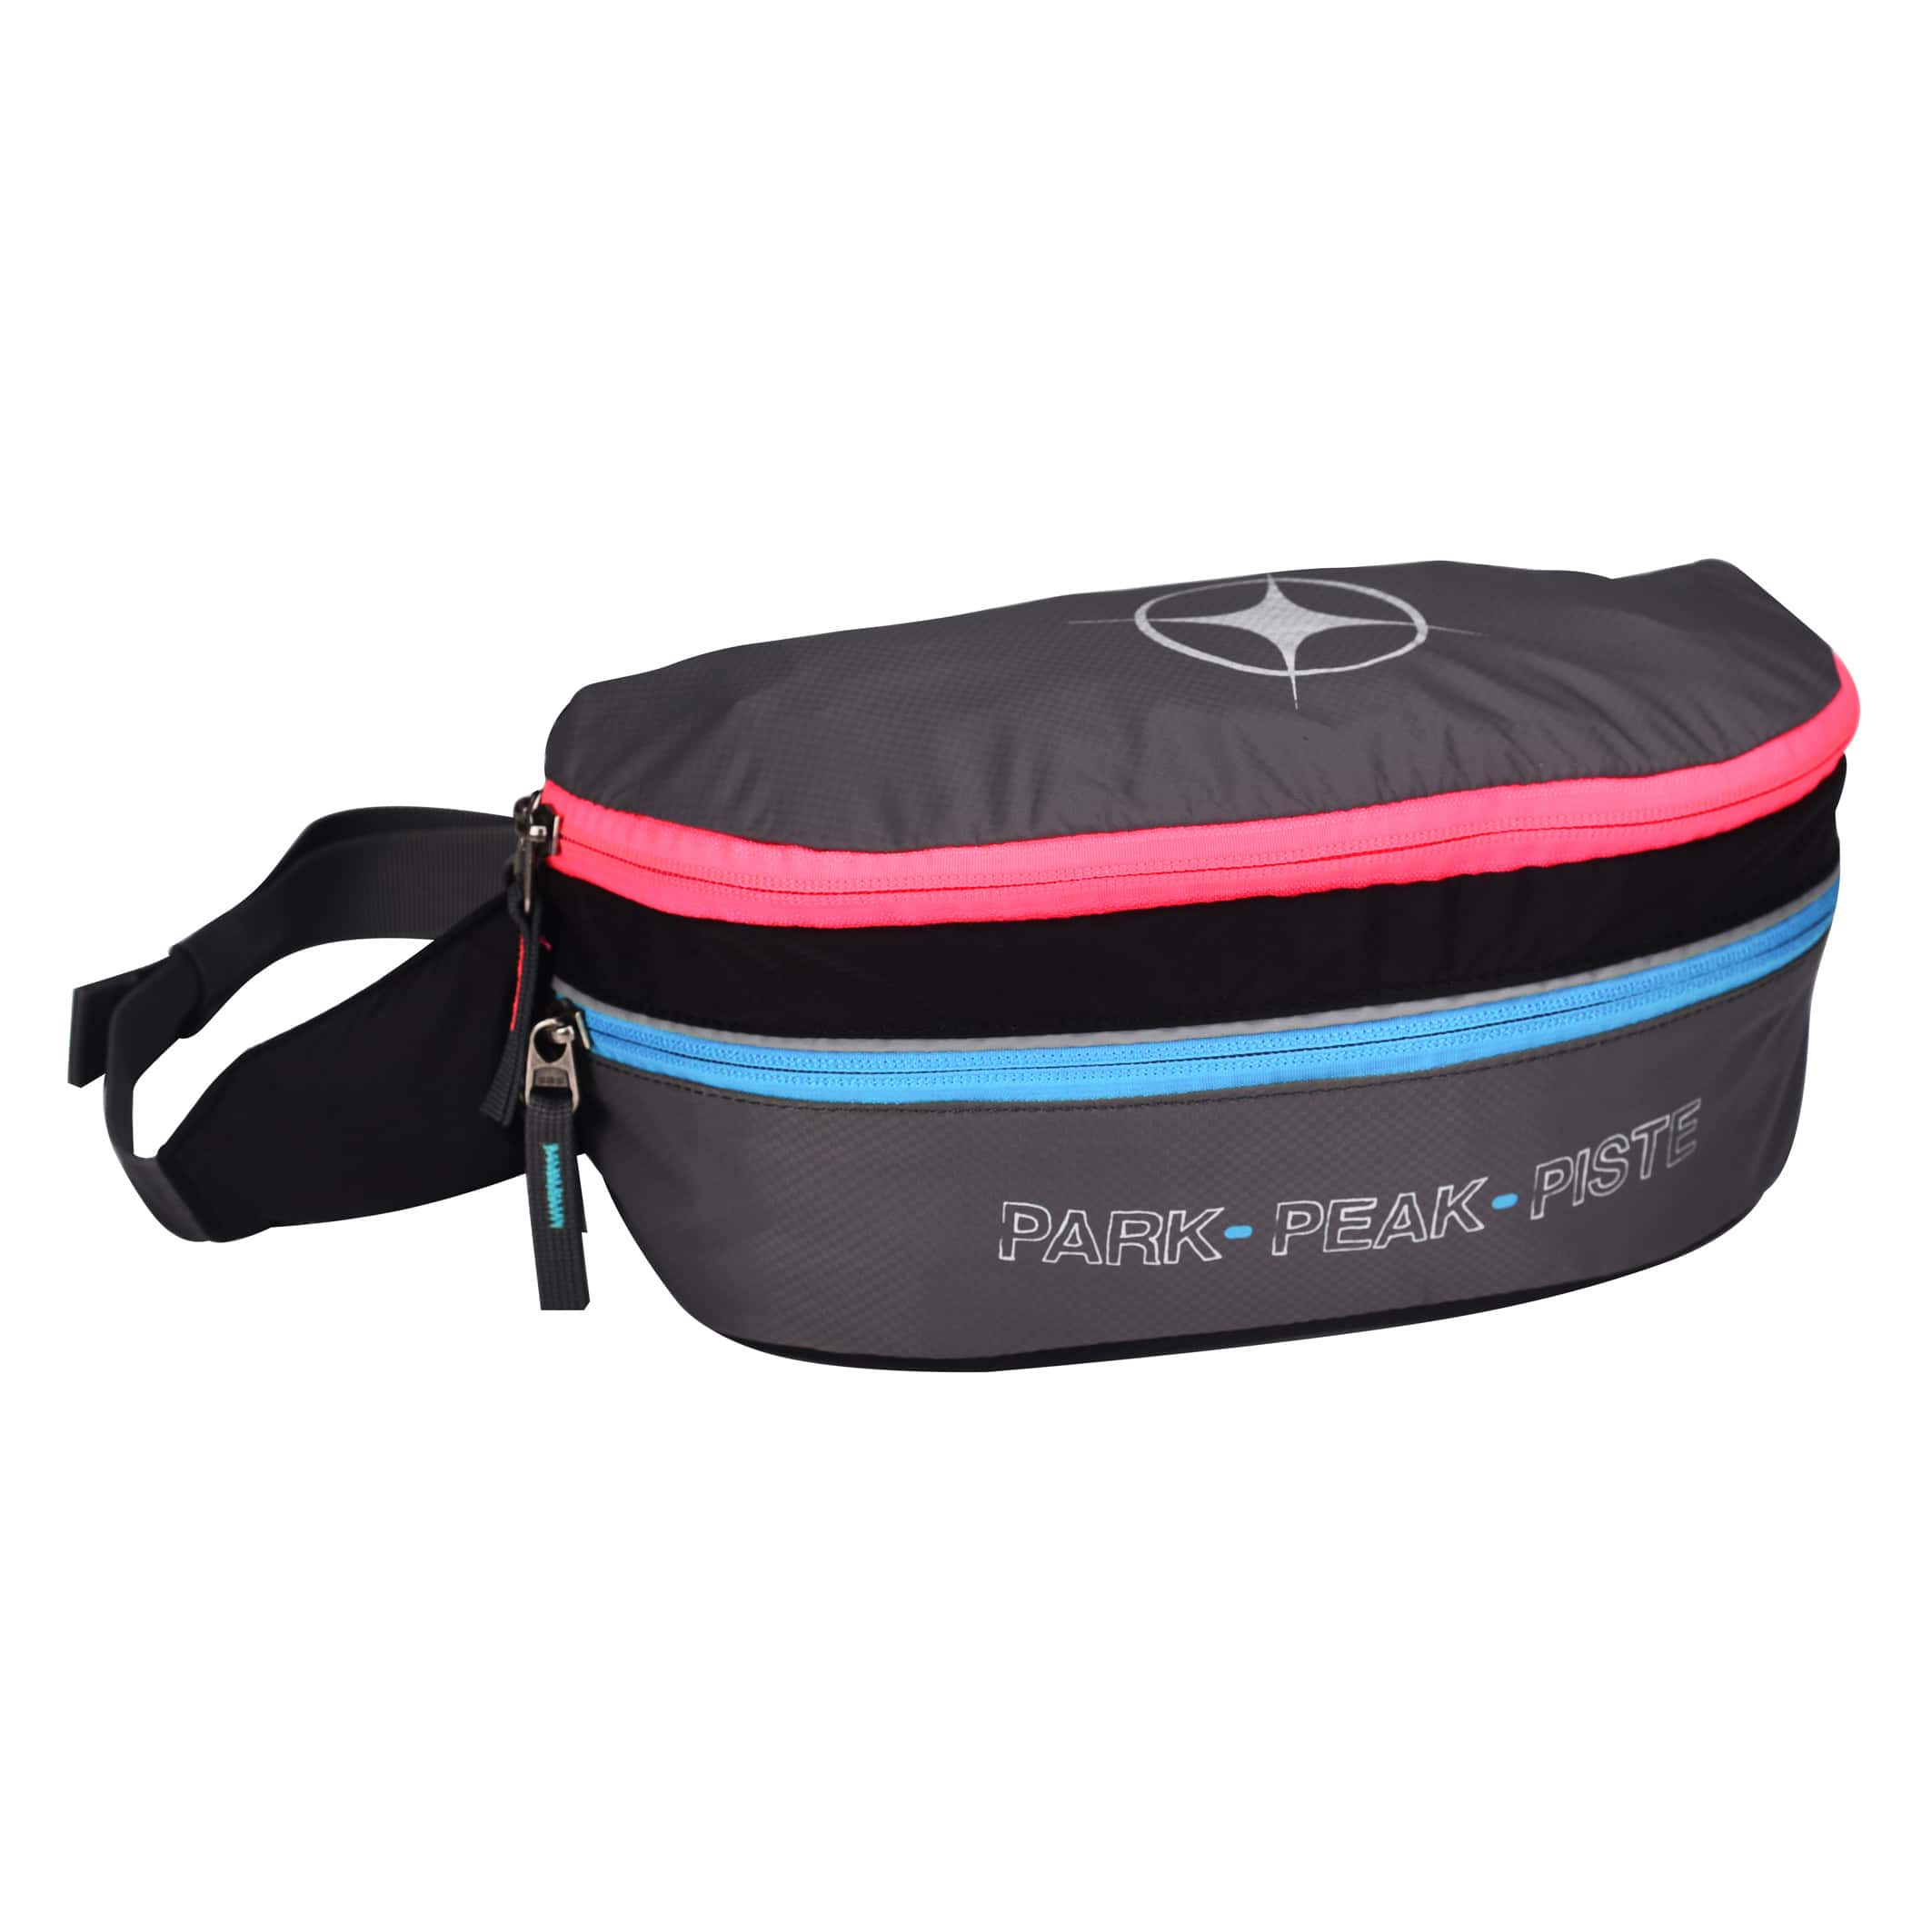 MB550-05-Backpack-2-in-1-Rock-Blue-Pink-Closed